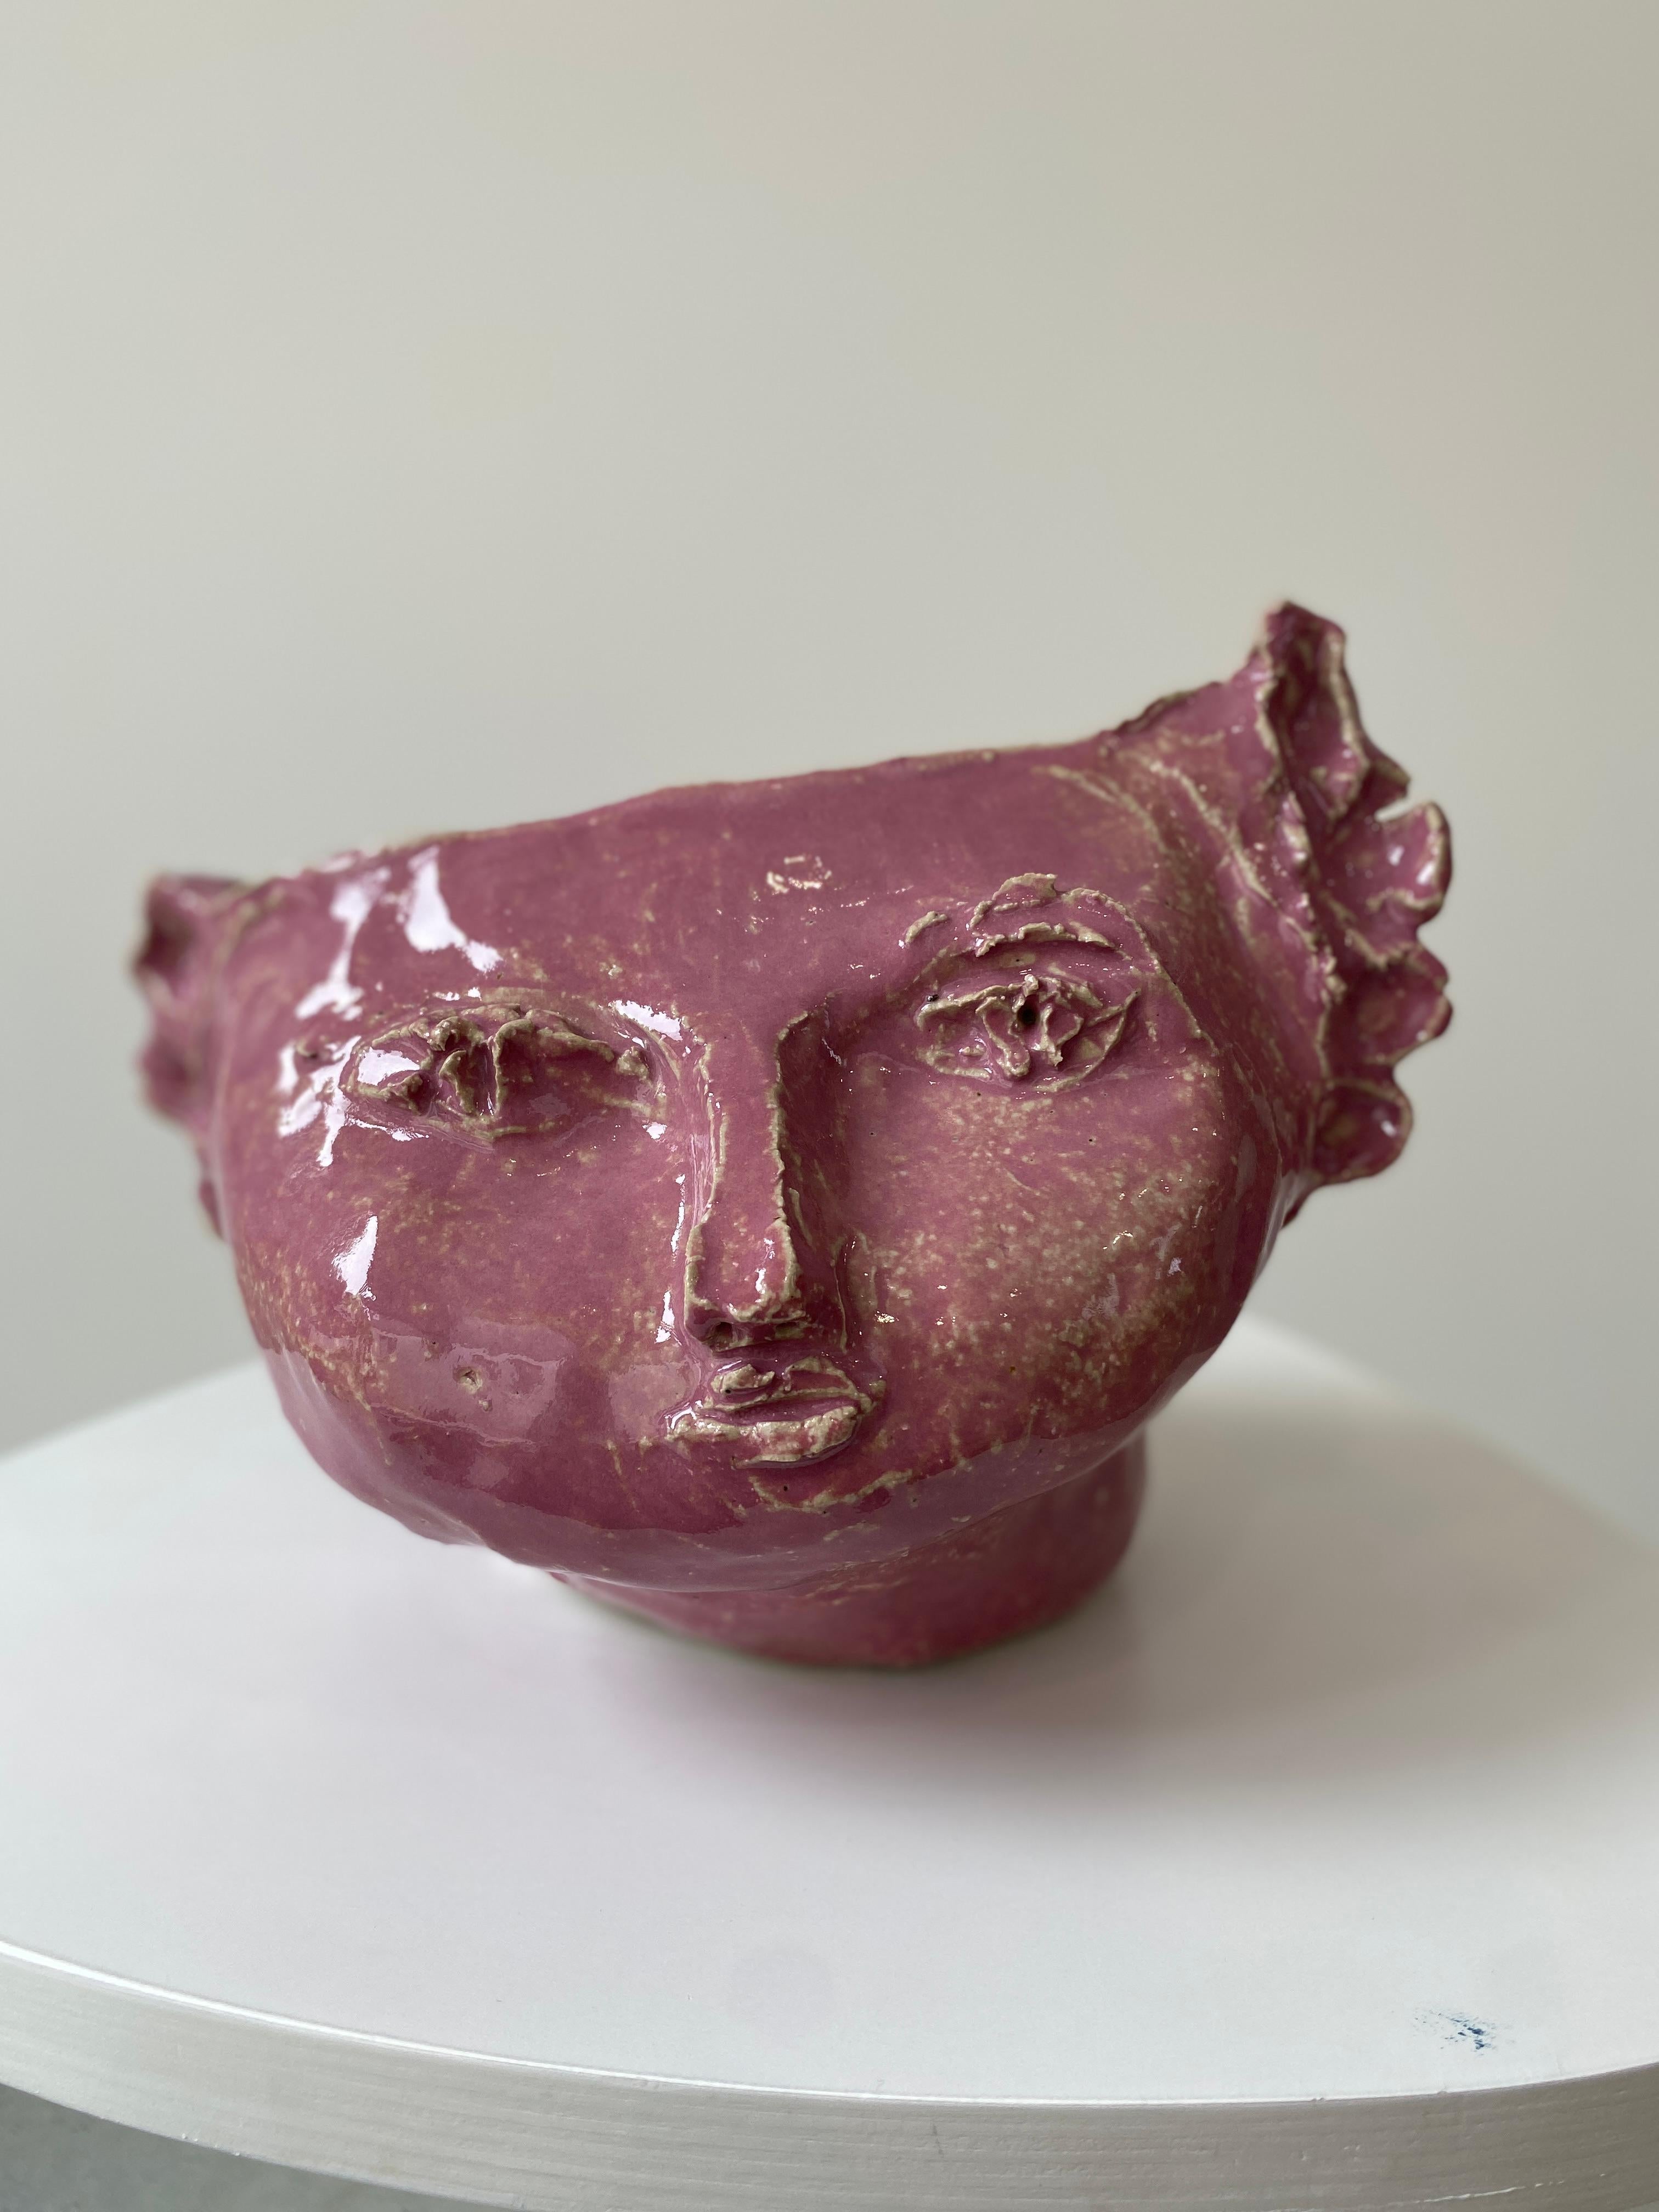 Pink sweet girl rustic wabi sabi hand sculpted glazed clay head face vessel vase For Sale 14